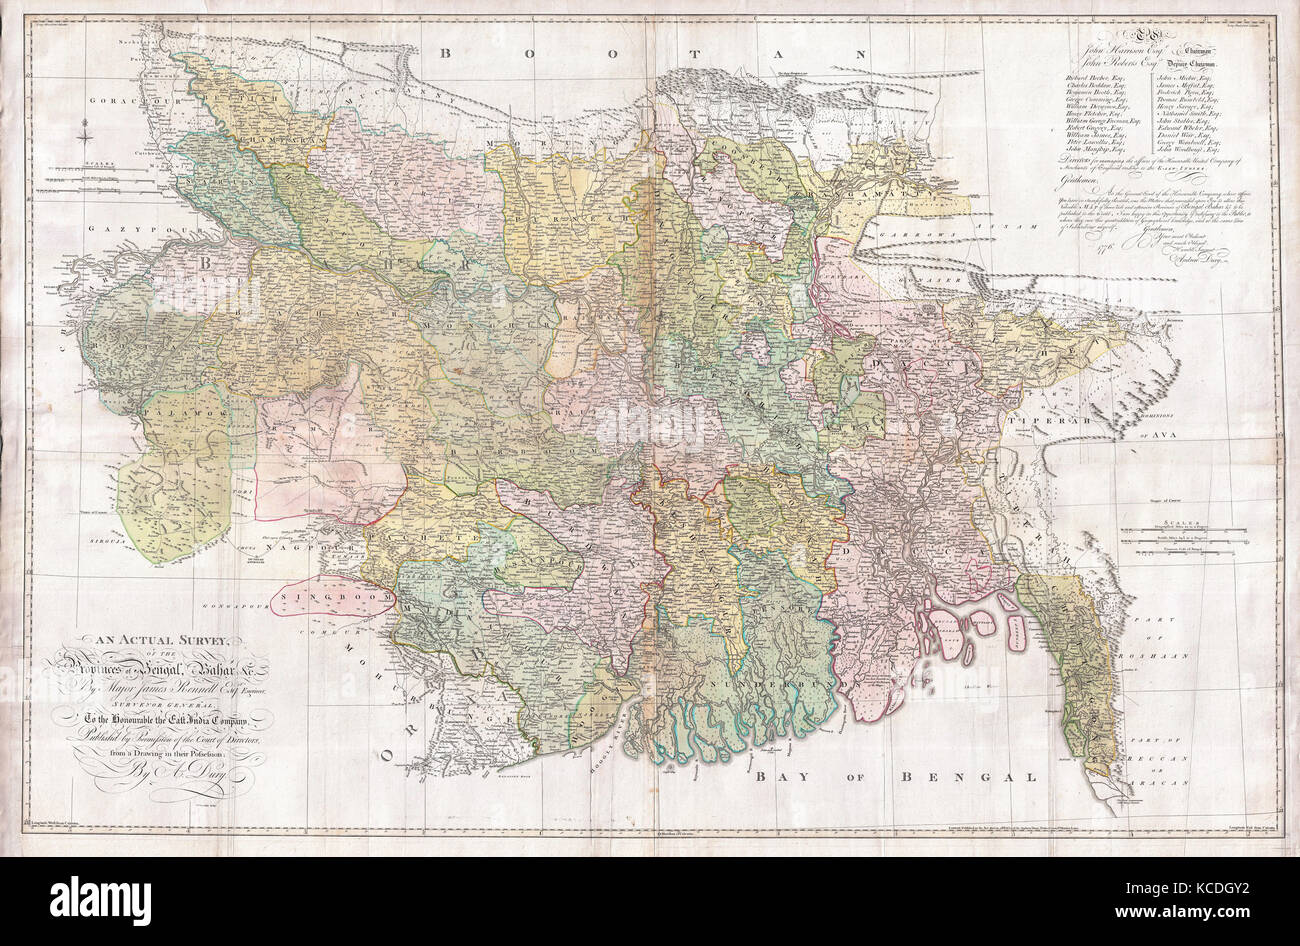 1776, Rennell, Dury Wall Map of Bihar and Bengal, India Stock Photo